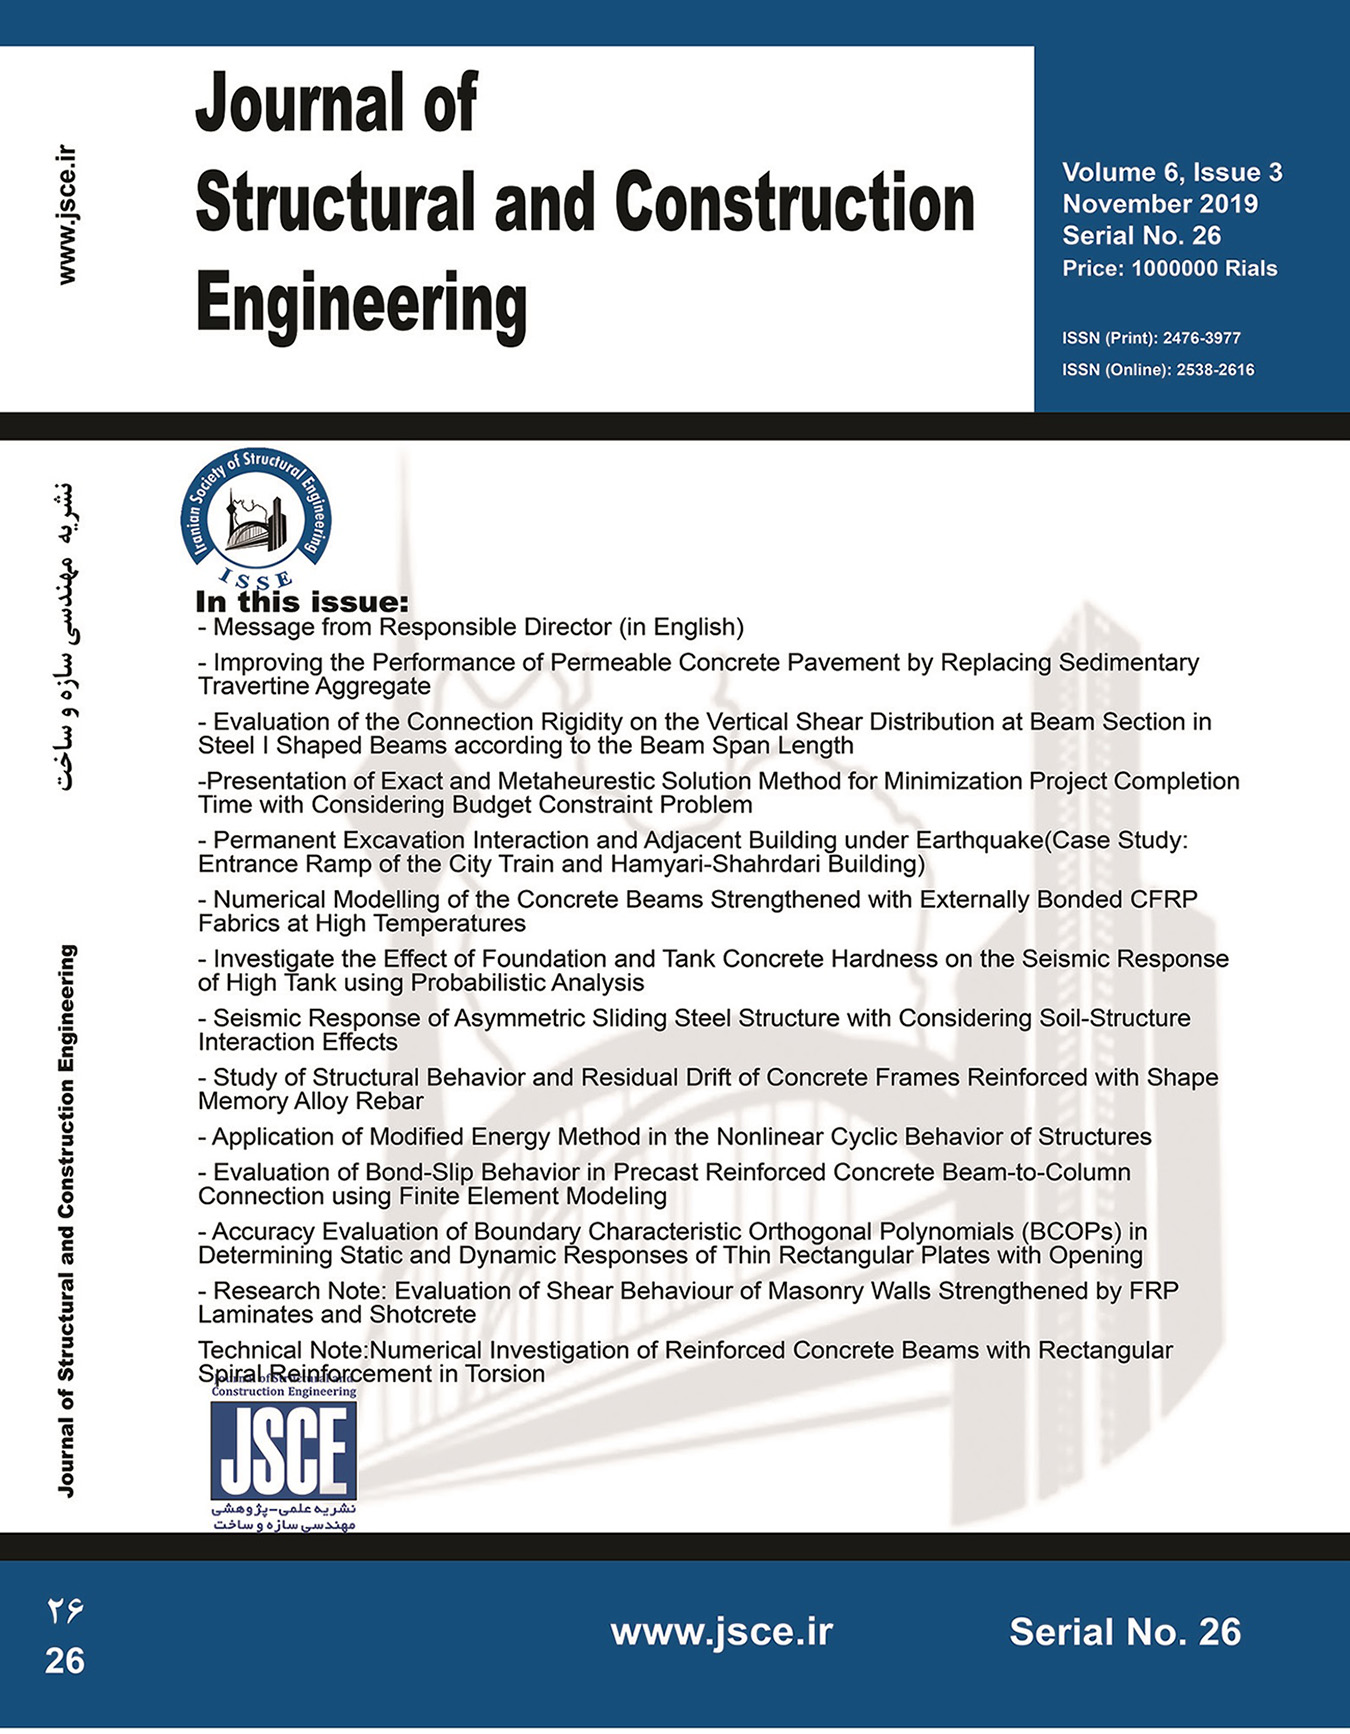 Journal of Structural and Construction Engineering